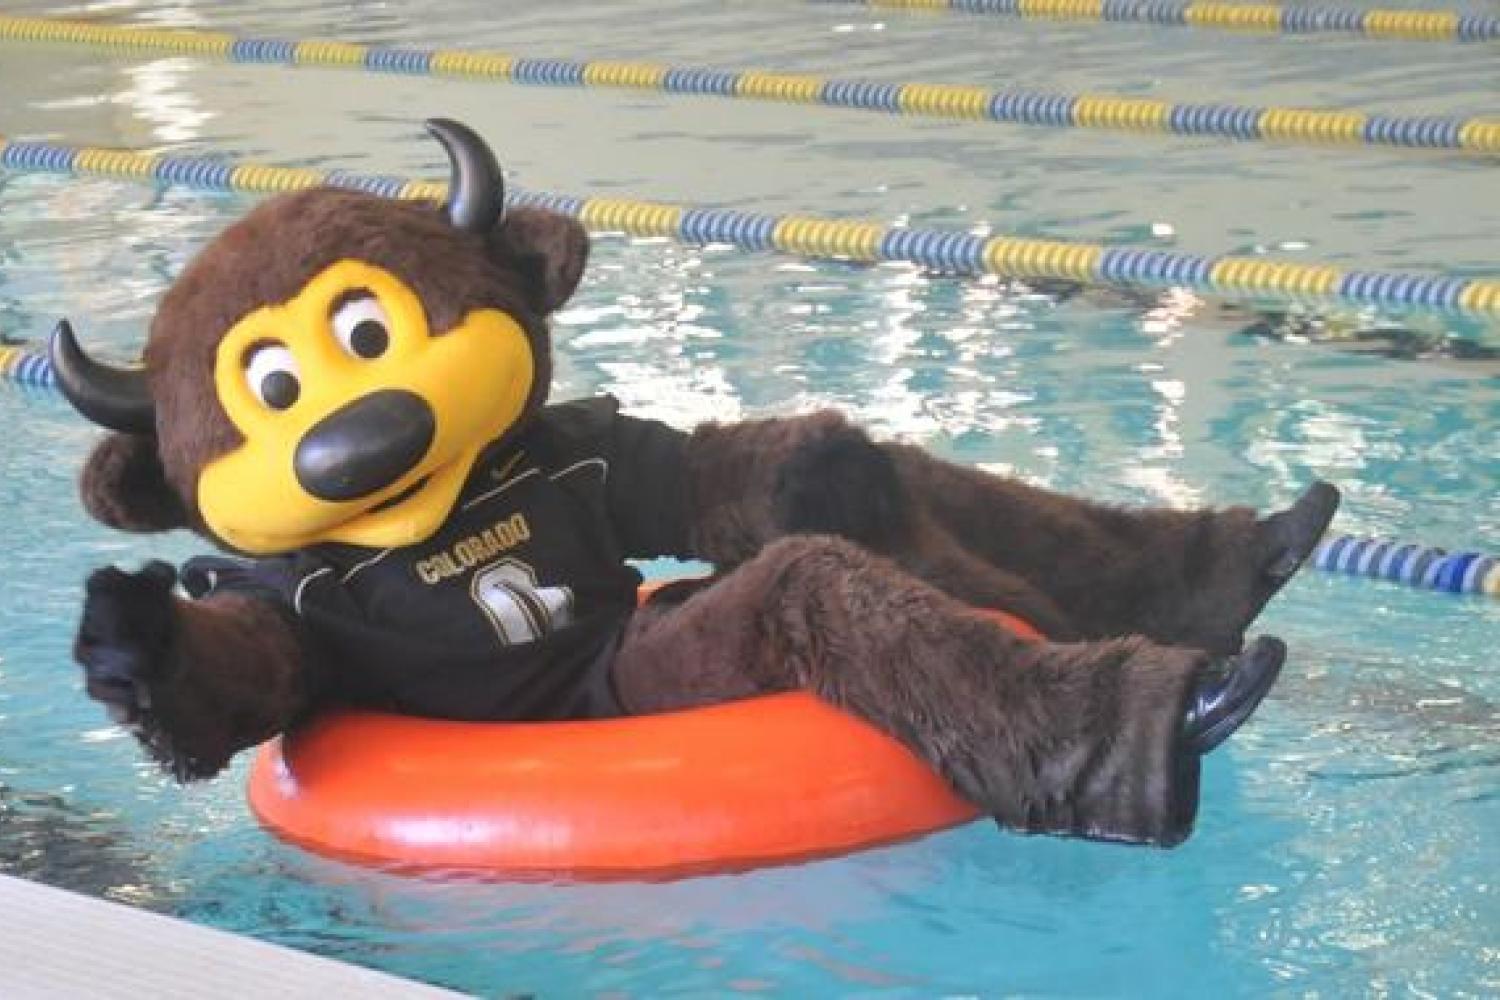 Chip has won best mascot in the nation twice